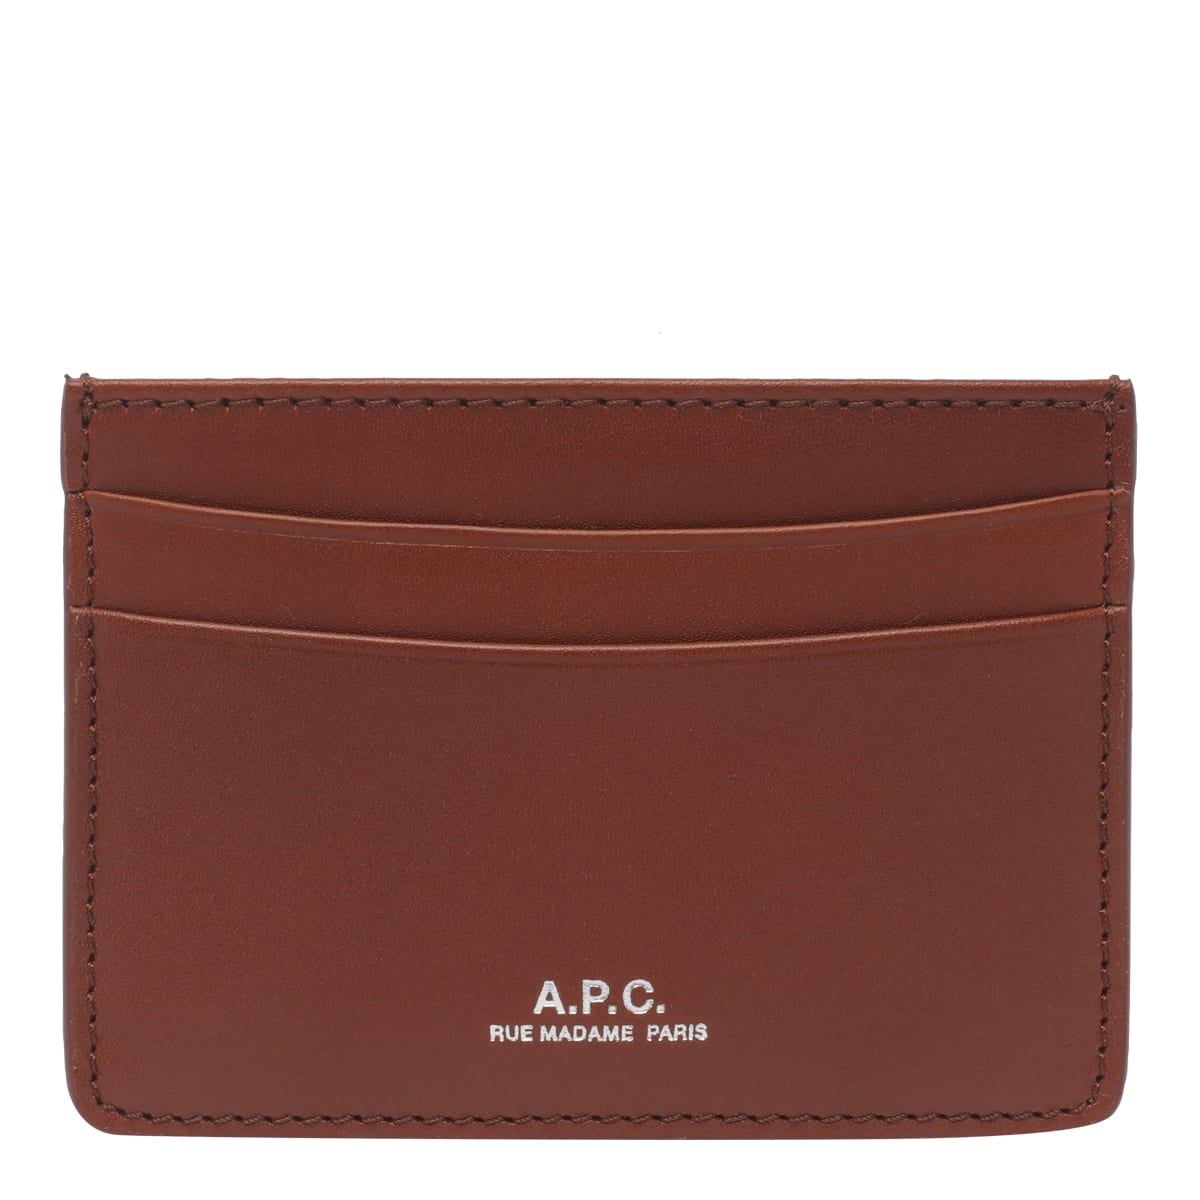 A.P.C. ANDRE CARDS HOLDER